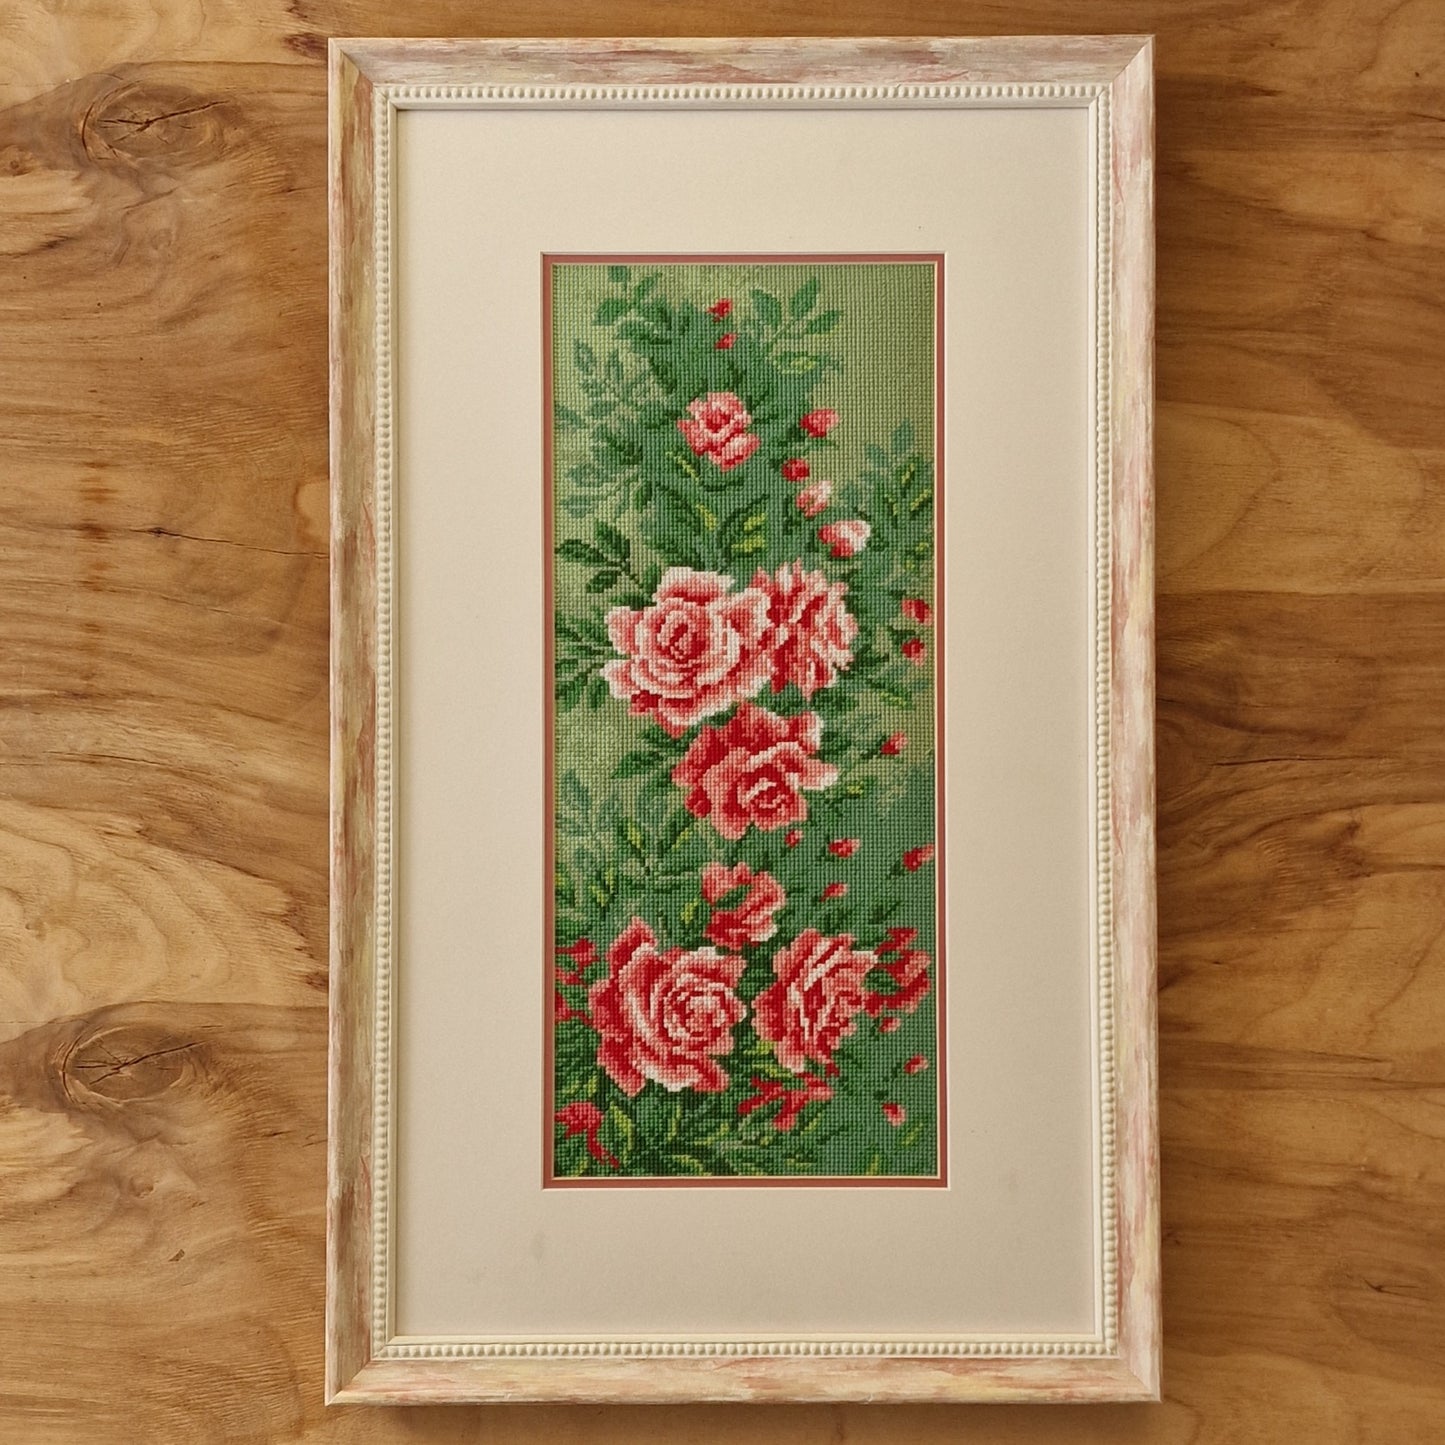 Embroidered painting "Roses" (INAU 4)